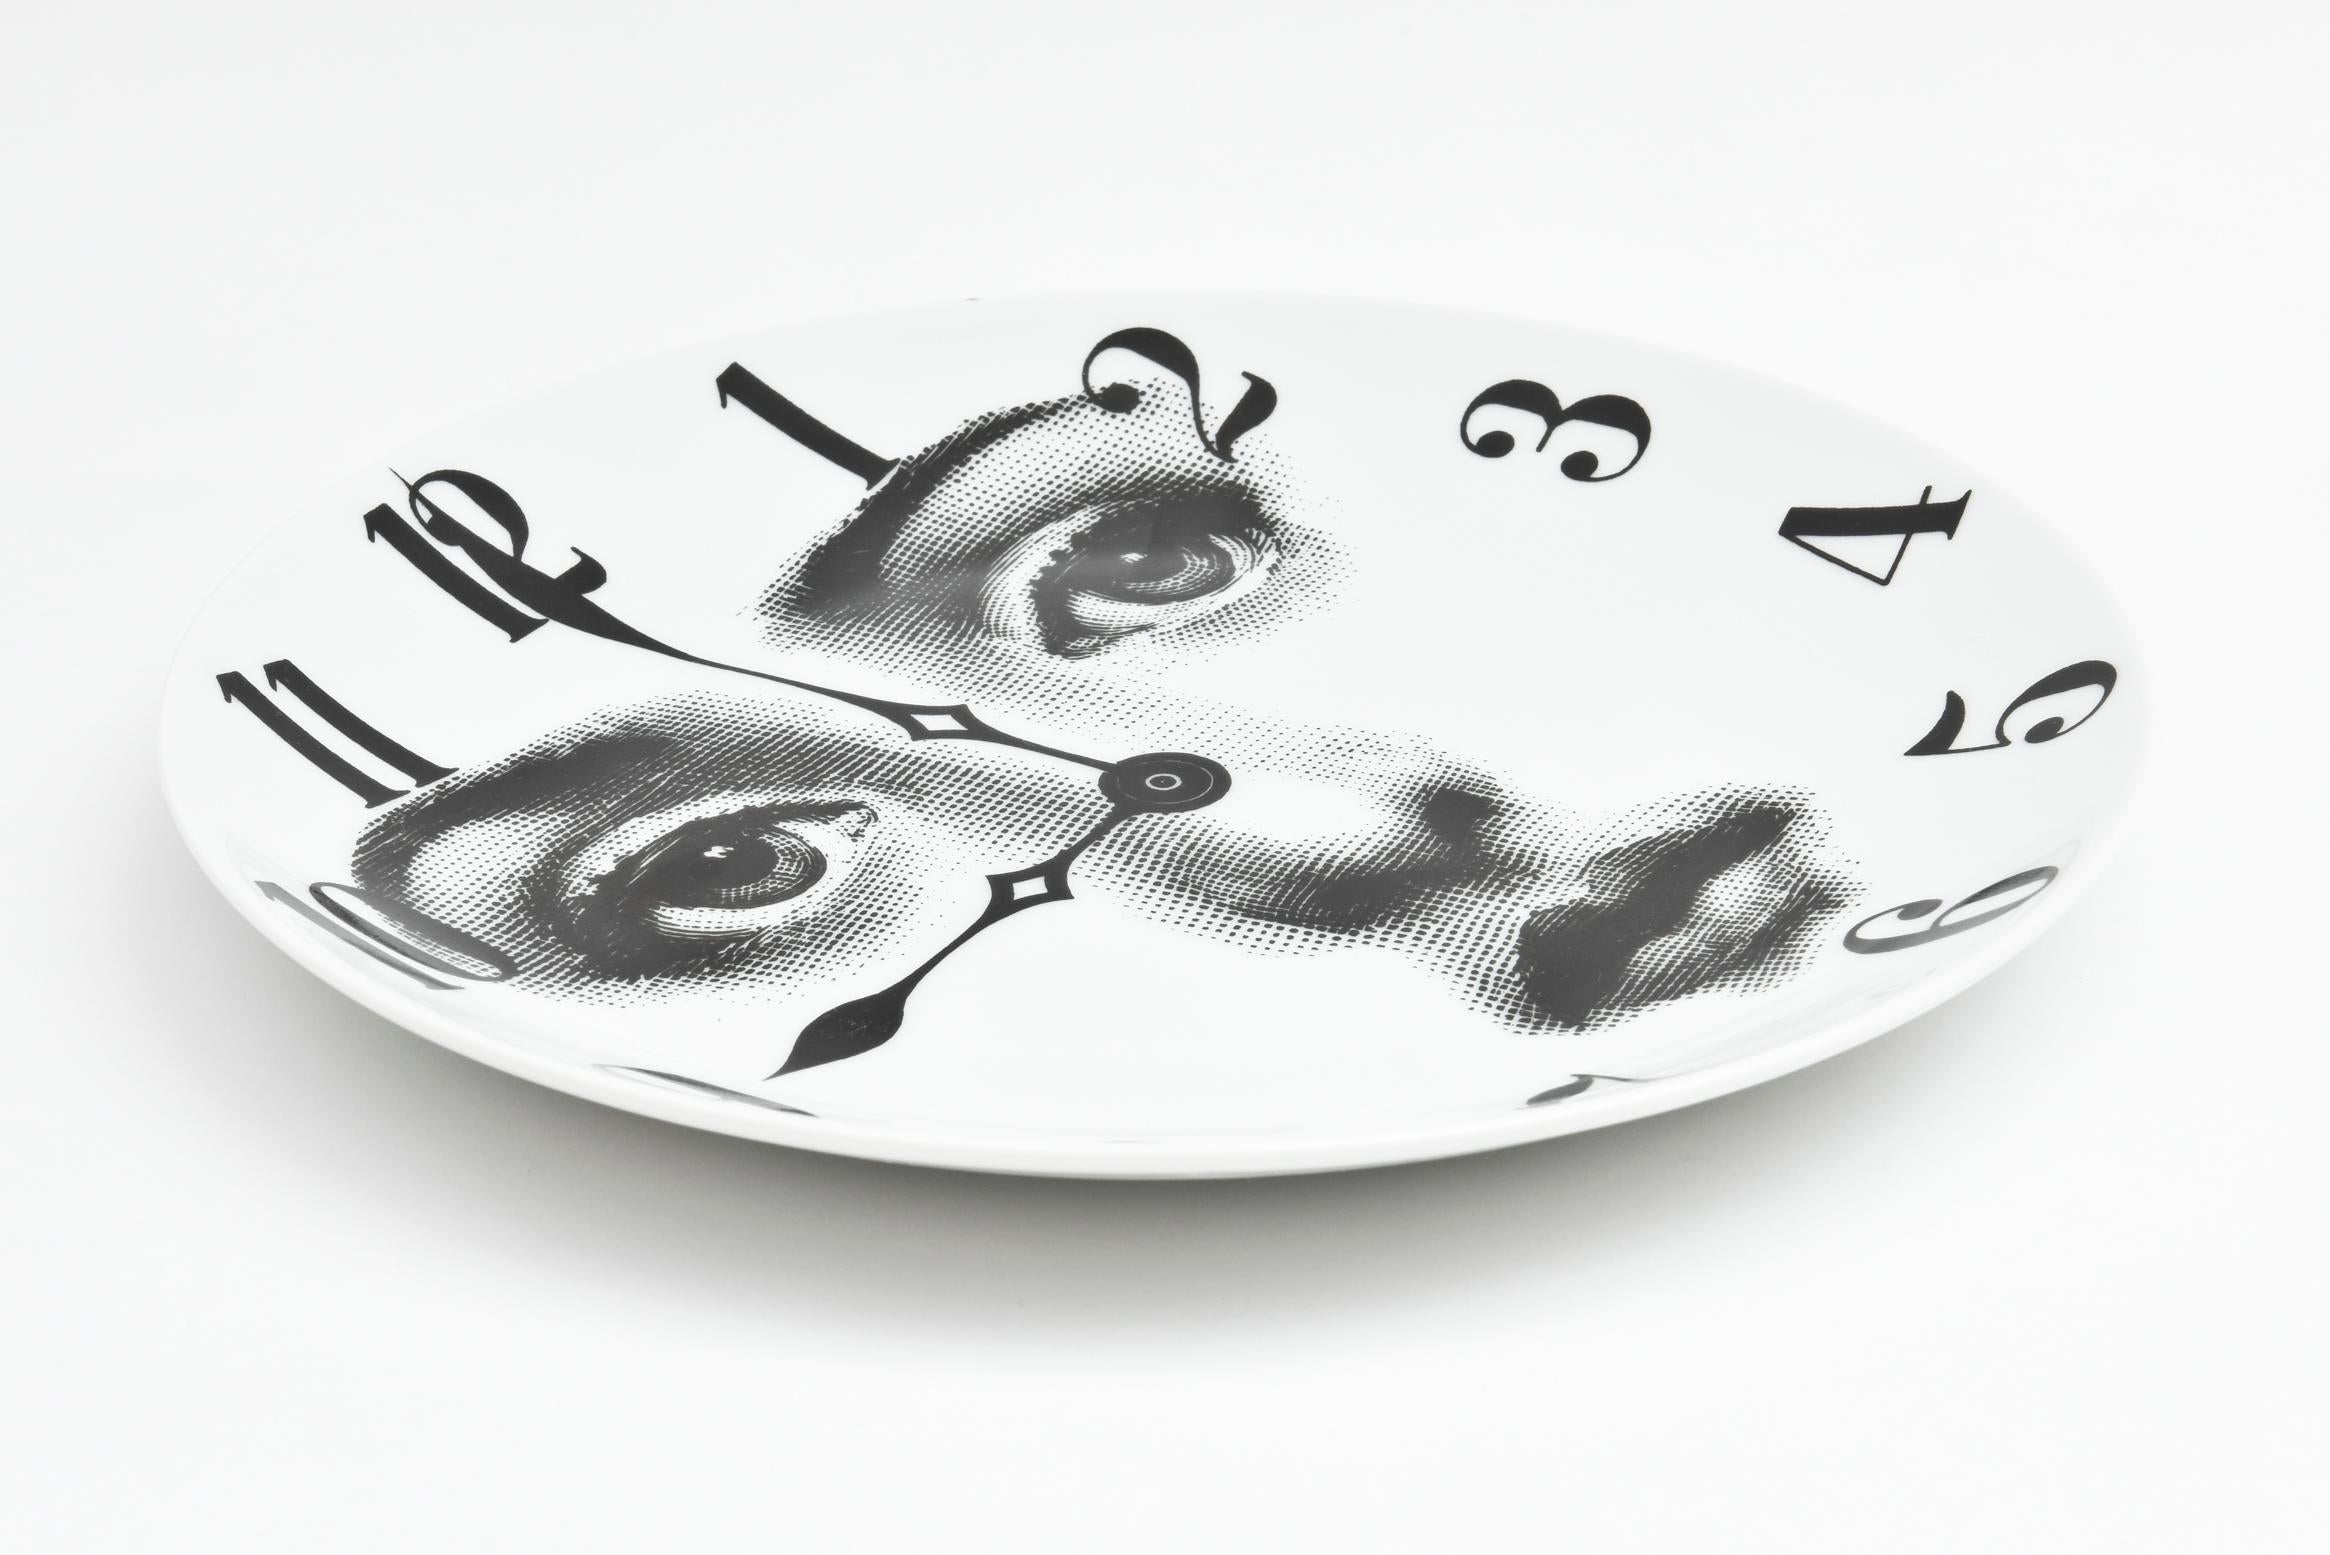 Hand-Crafted Vintage Piero Fornasetti Display Plate, Barney's New York Collection For Sale